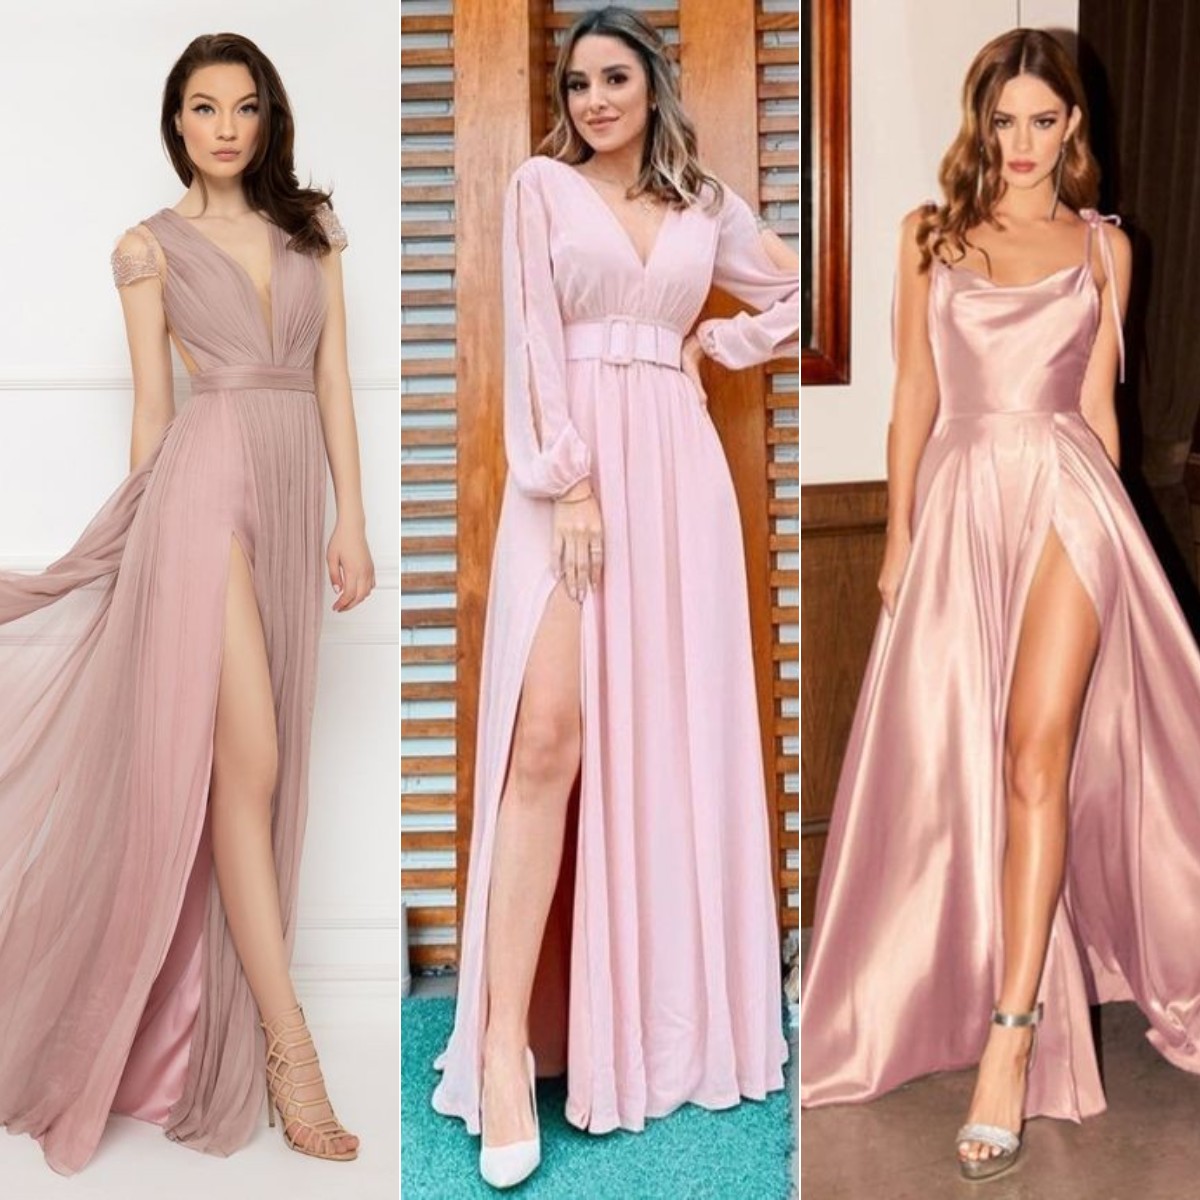 Finding the Perfect Pair: What Shoes to Wear with a Pink Party Dress